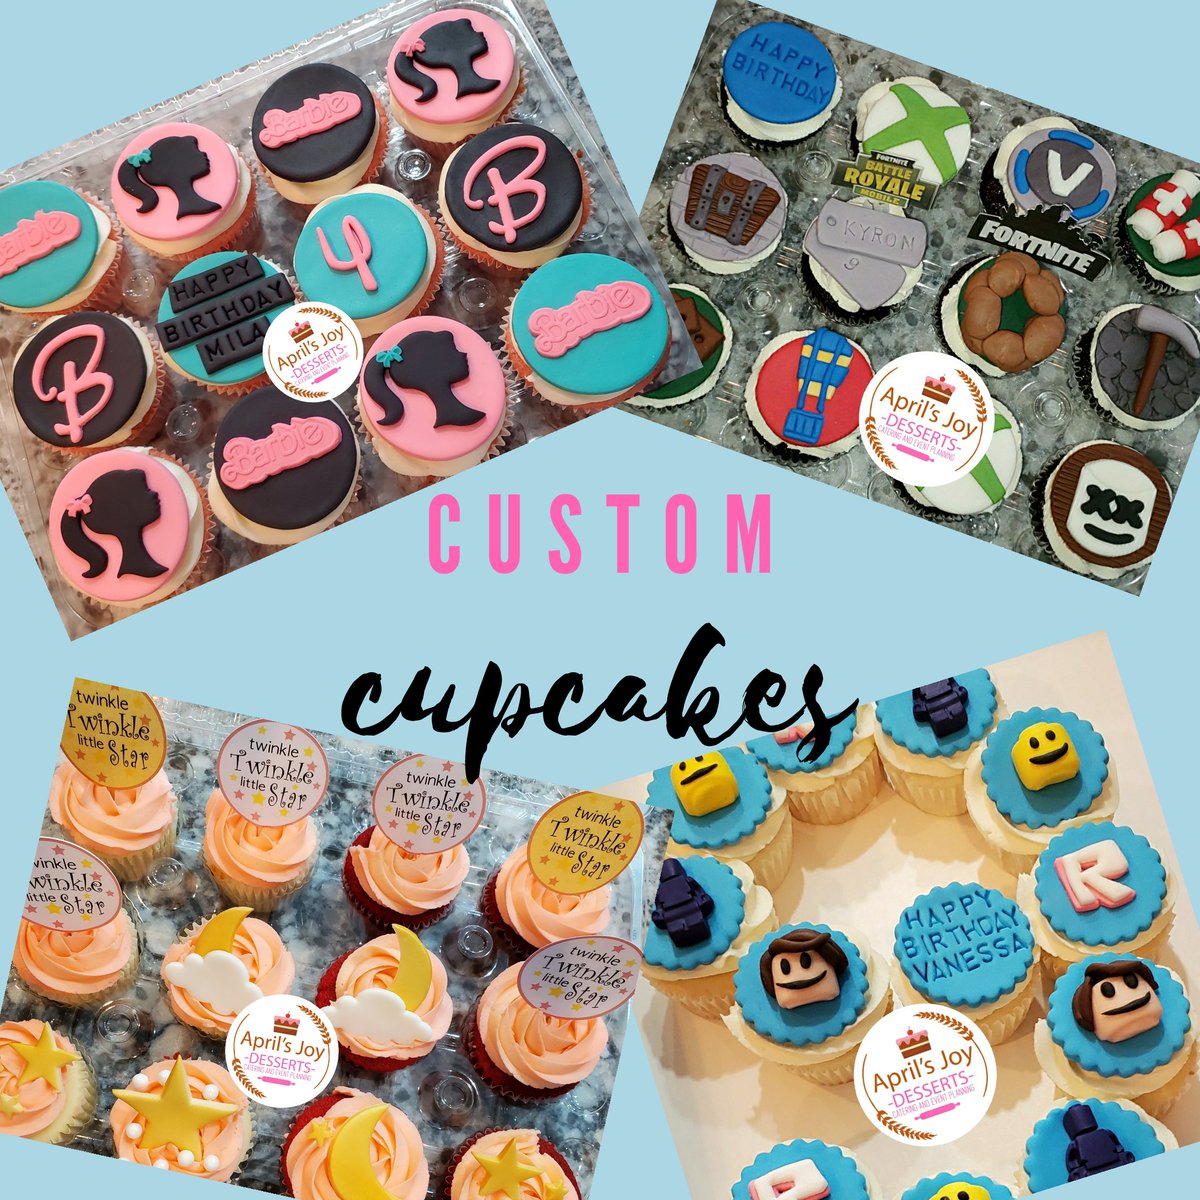 Having a small event, but you still want something custom??? Custom cupcakes are perfect.  We have some Barbie cupcakes, Fortnite cupcakes,  Roblox Cupcakes and some Twinkle Twinkle Twinkle little star cupcakes. #Barbie #Fortnite #Roblox #Baker #Customcupcakes #Aprilsjoydesserts